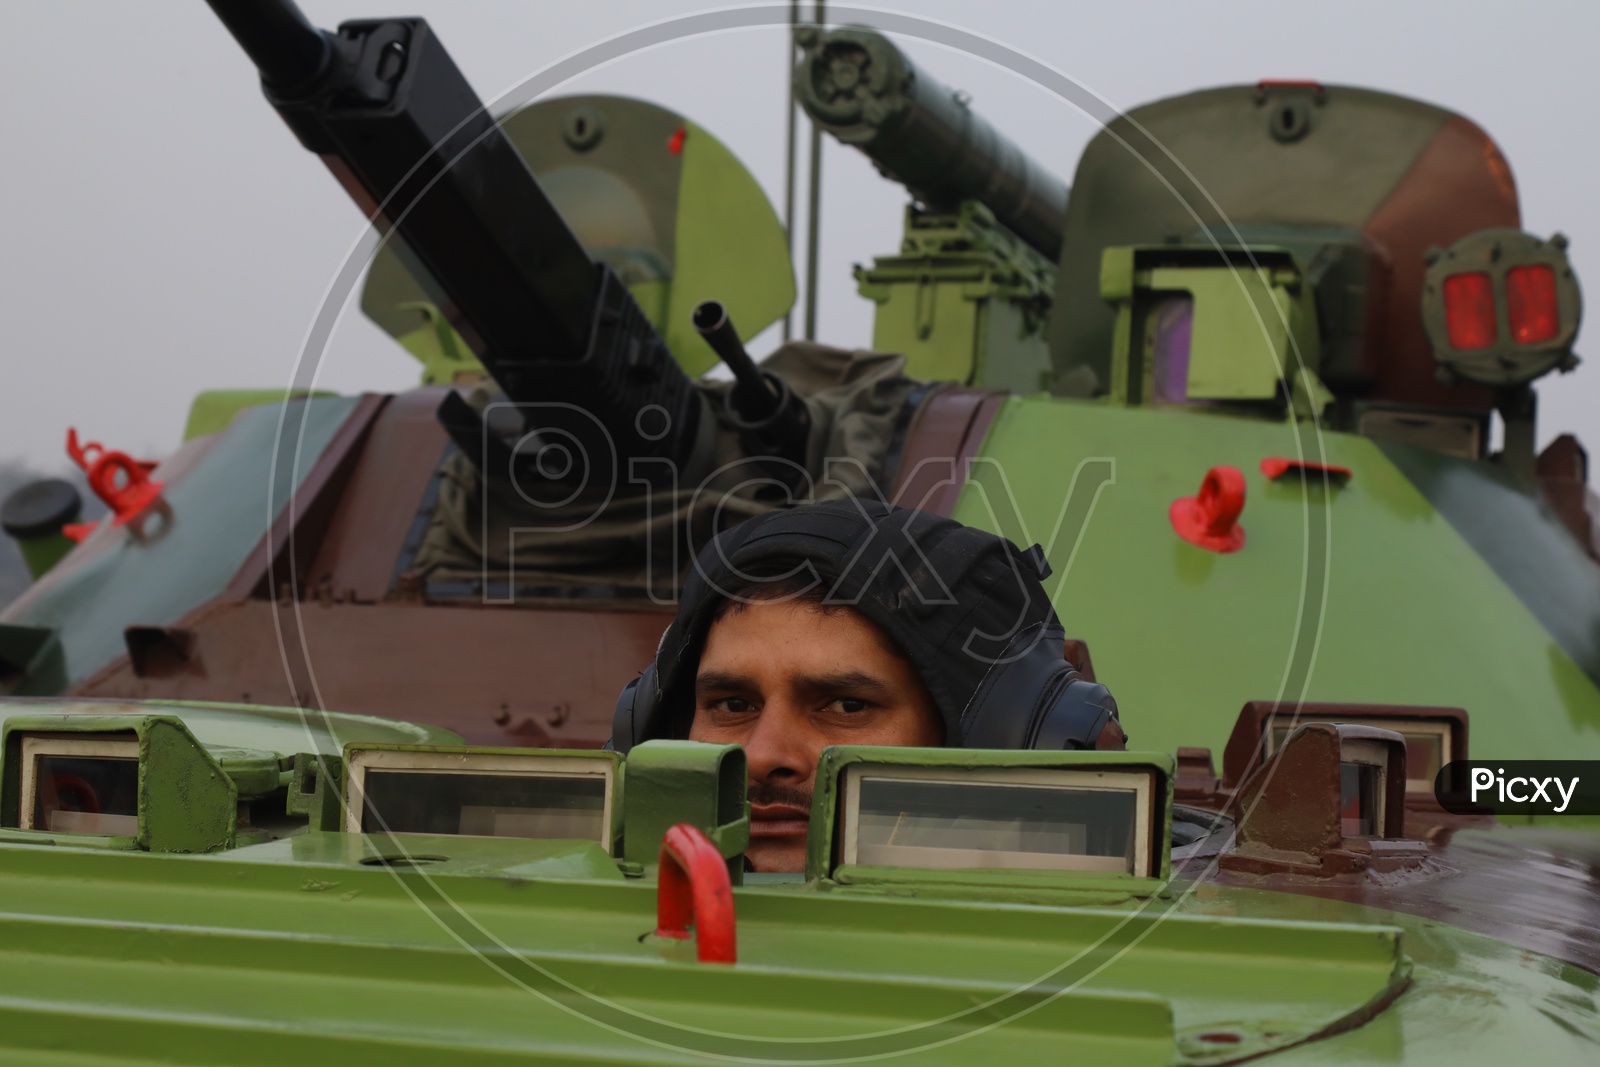 Indian Army Soldier on Battle Tank